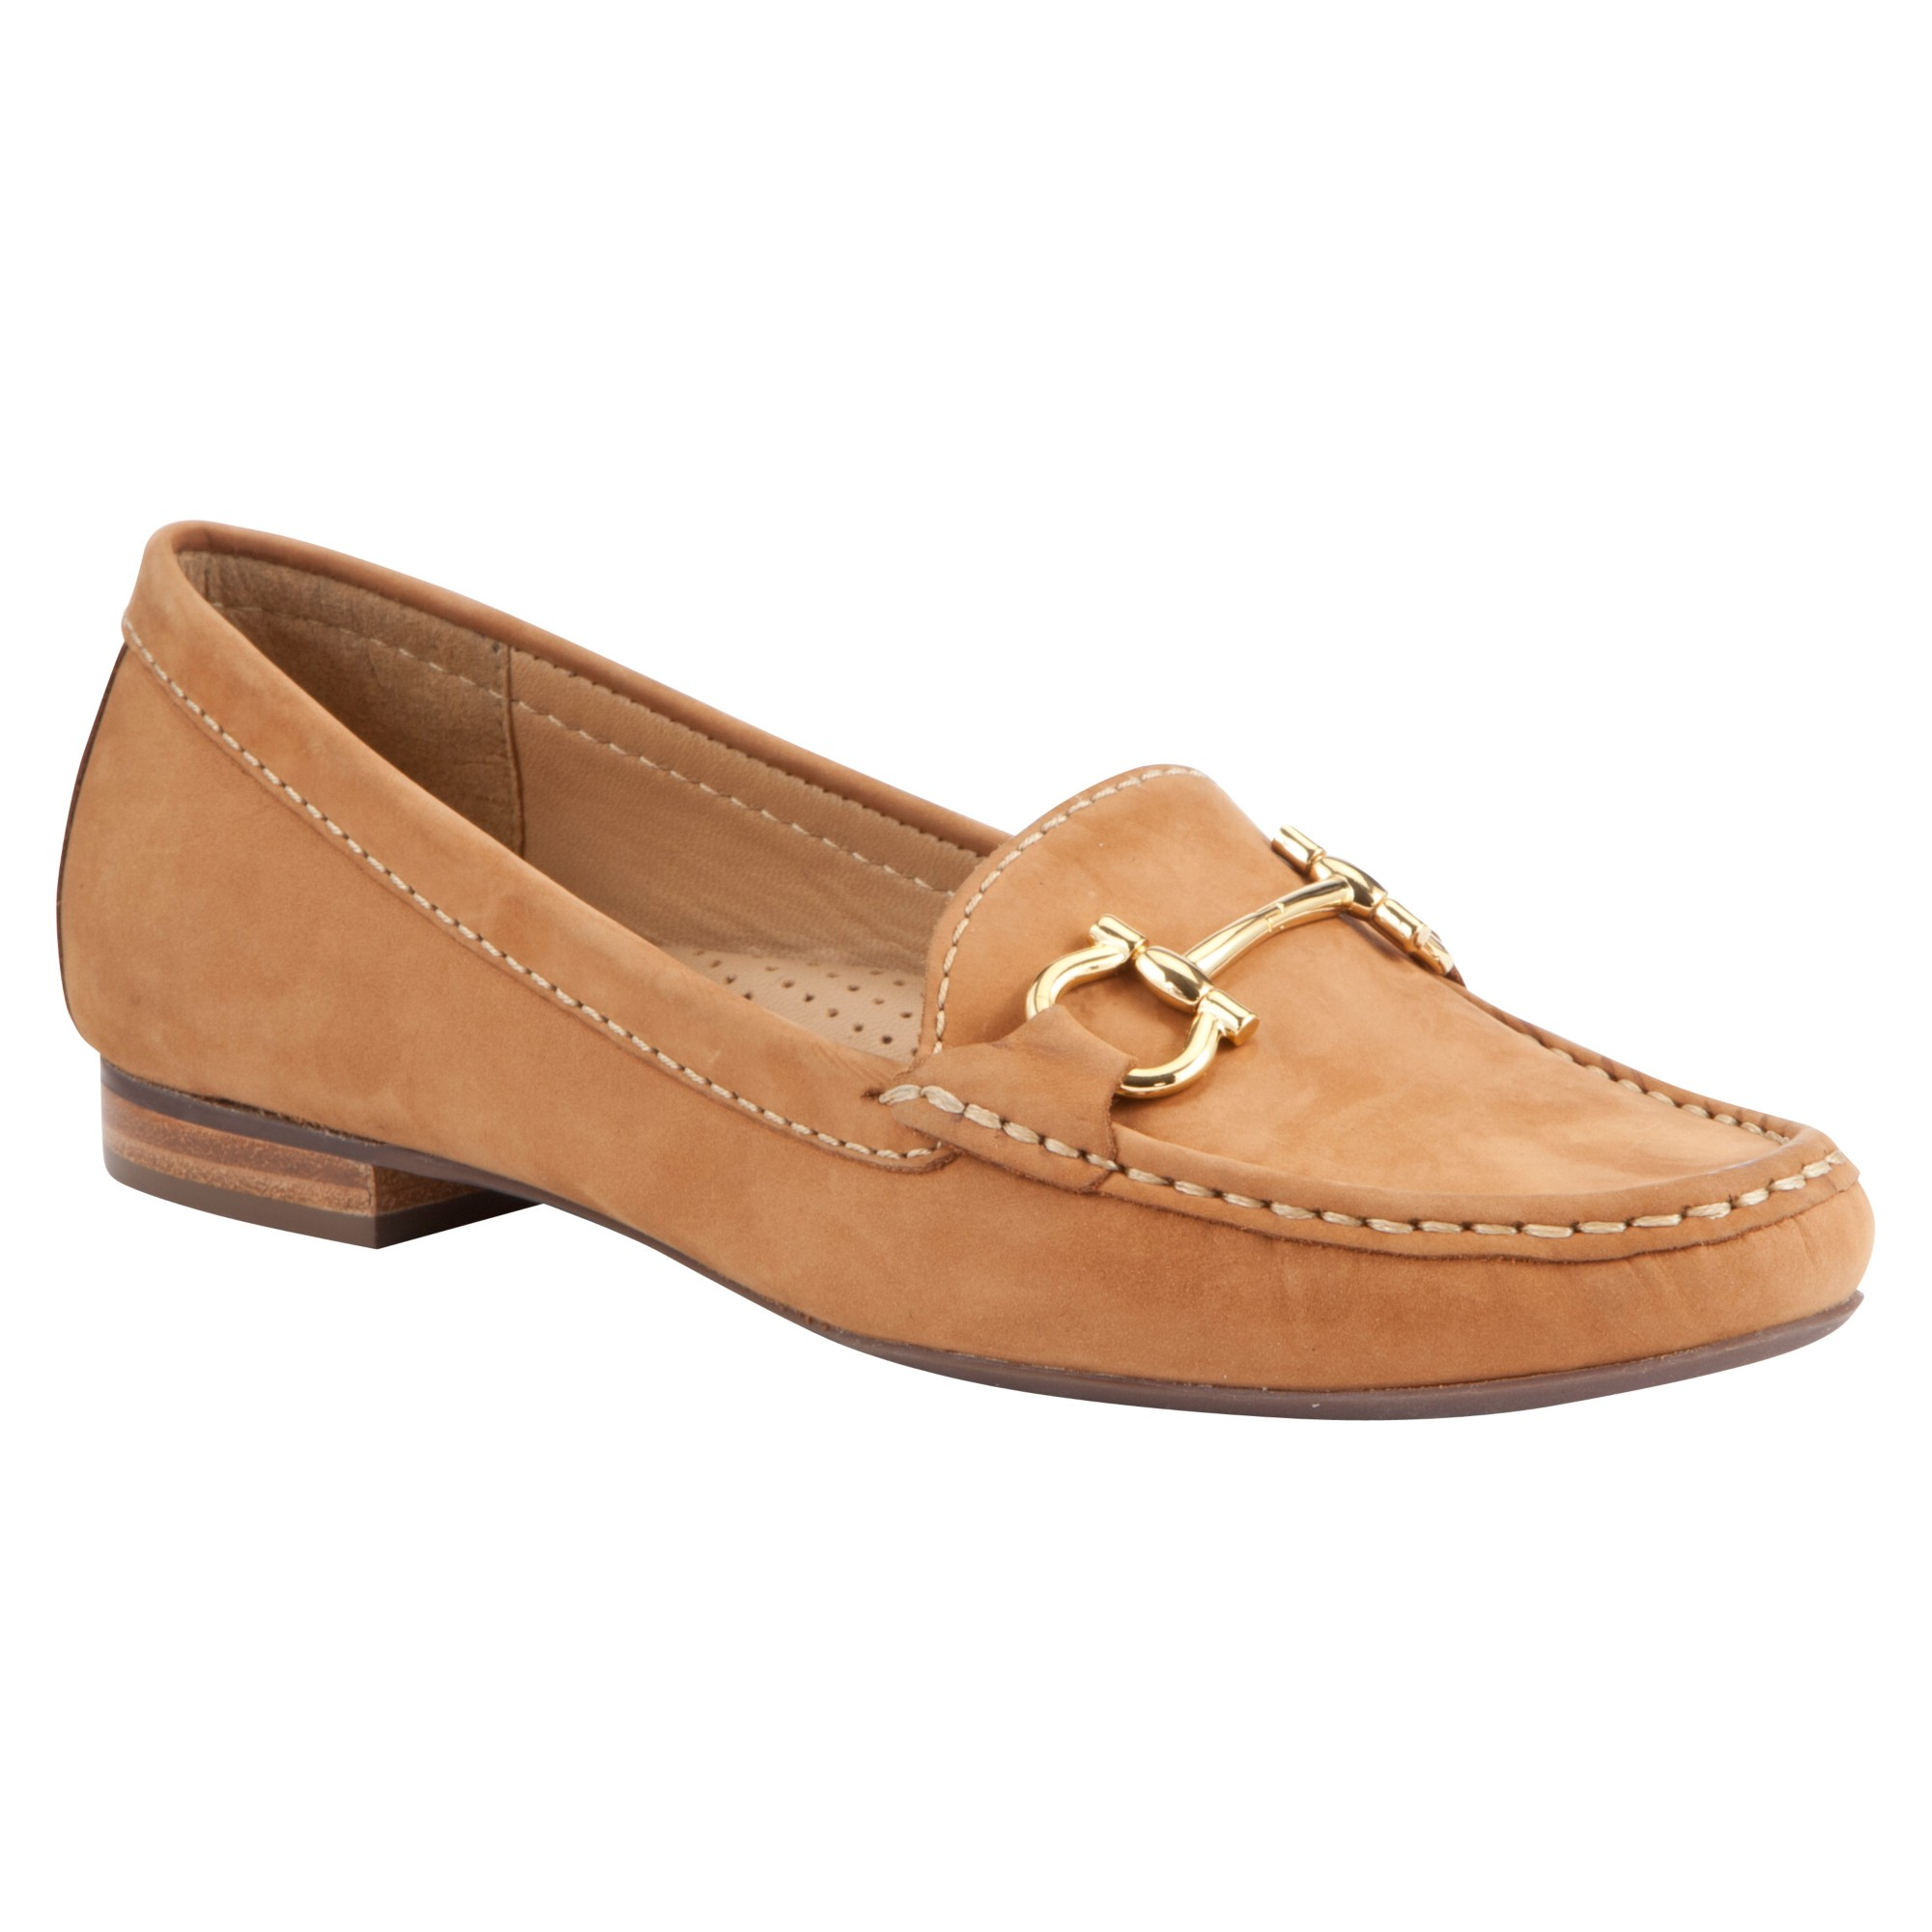 John Lewis Austin Moccasin Loafers in Brown (Tan) | Lyst